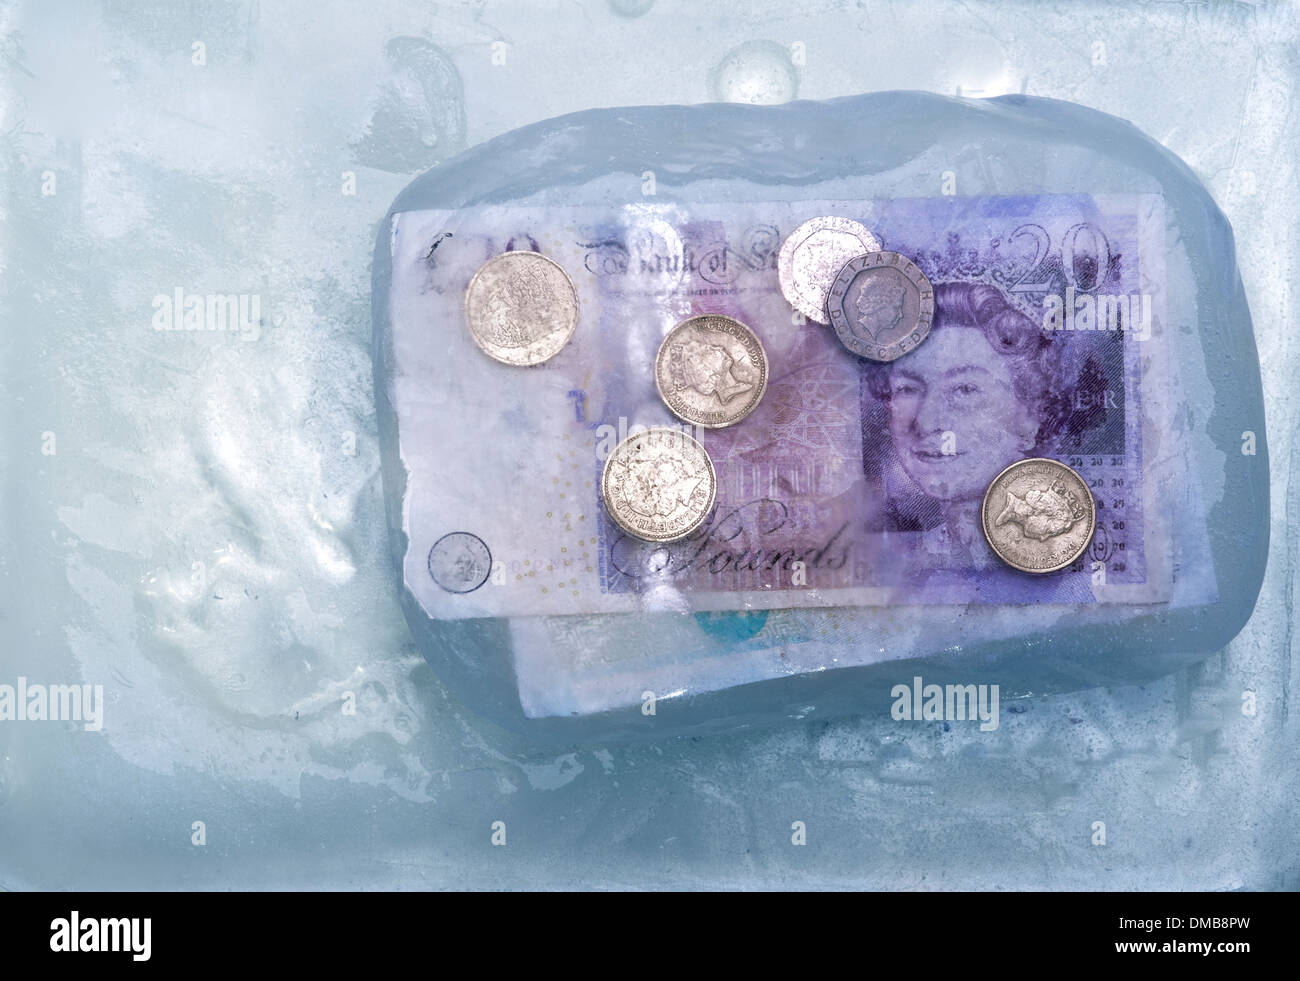 Money suspended in ice.Frozen assets. Stock Photo